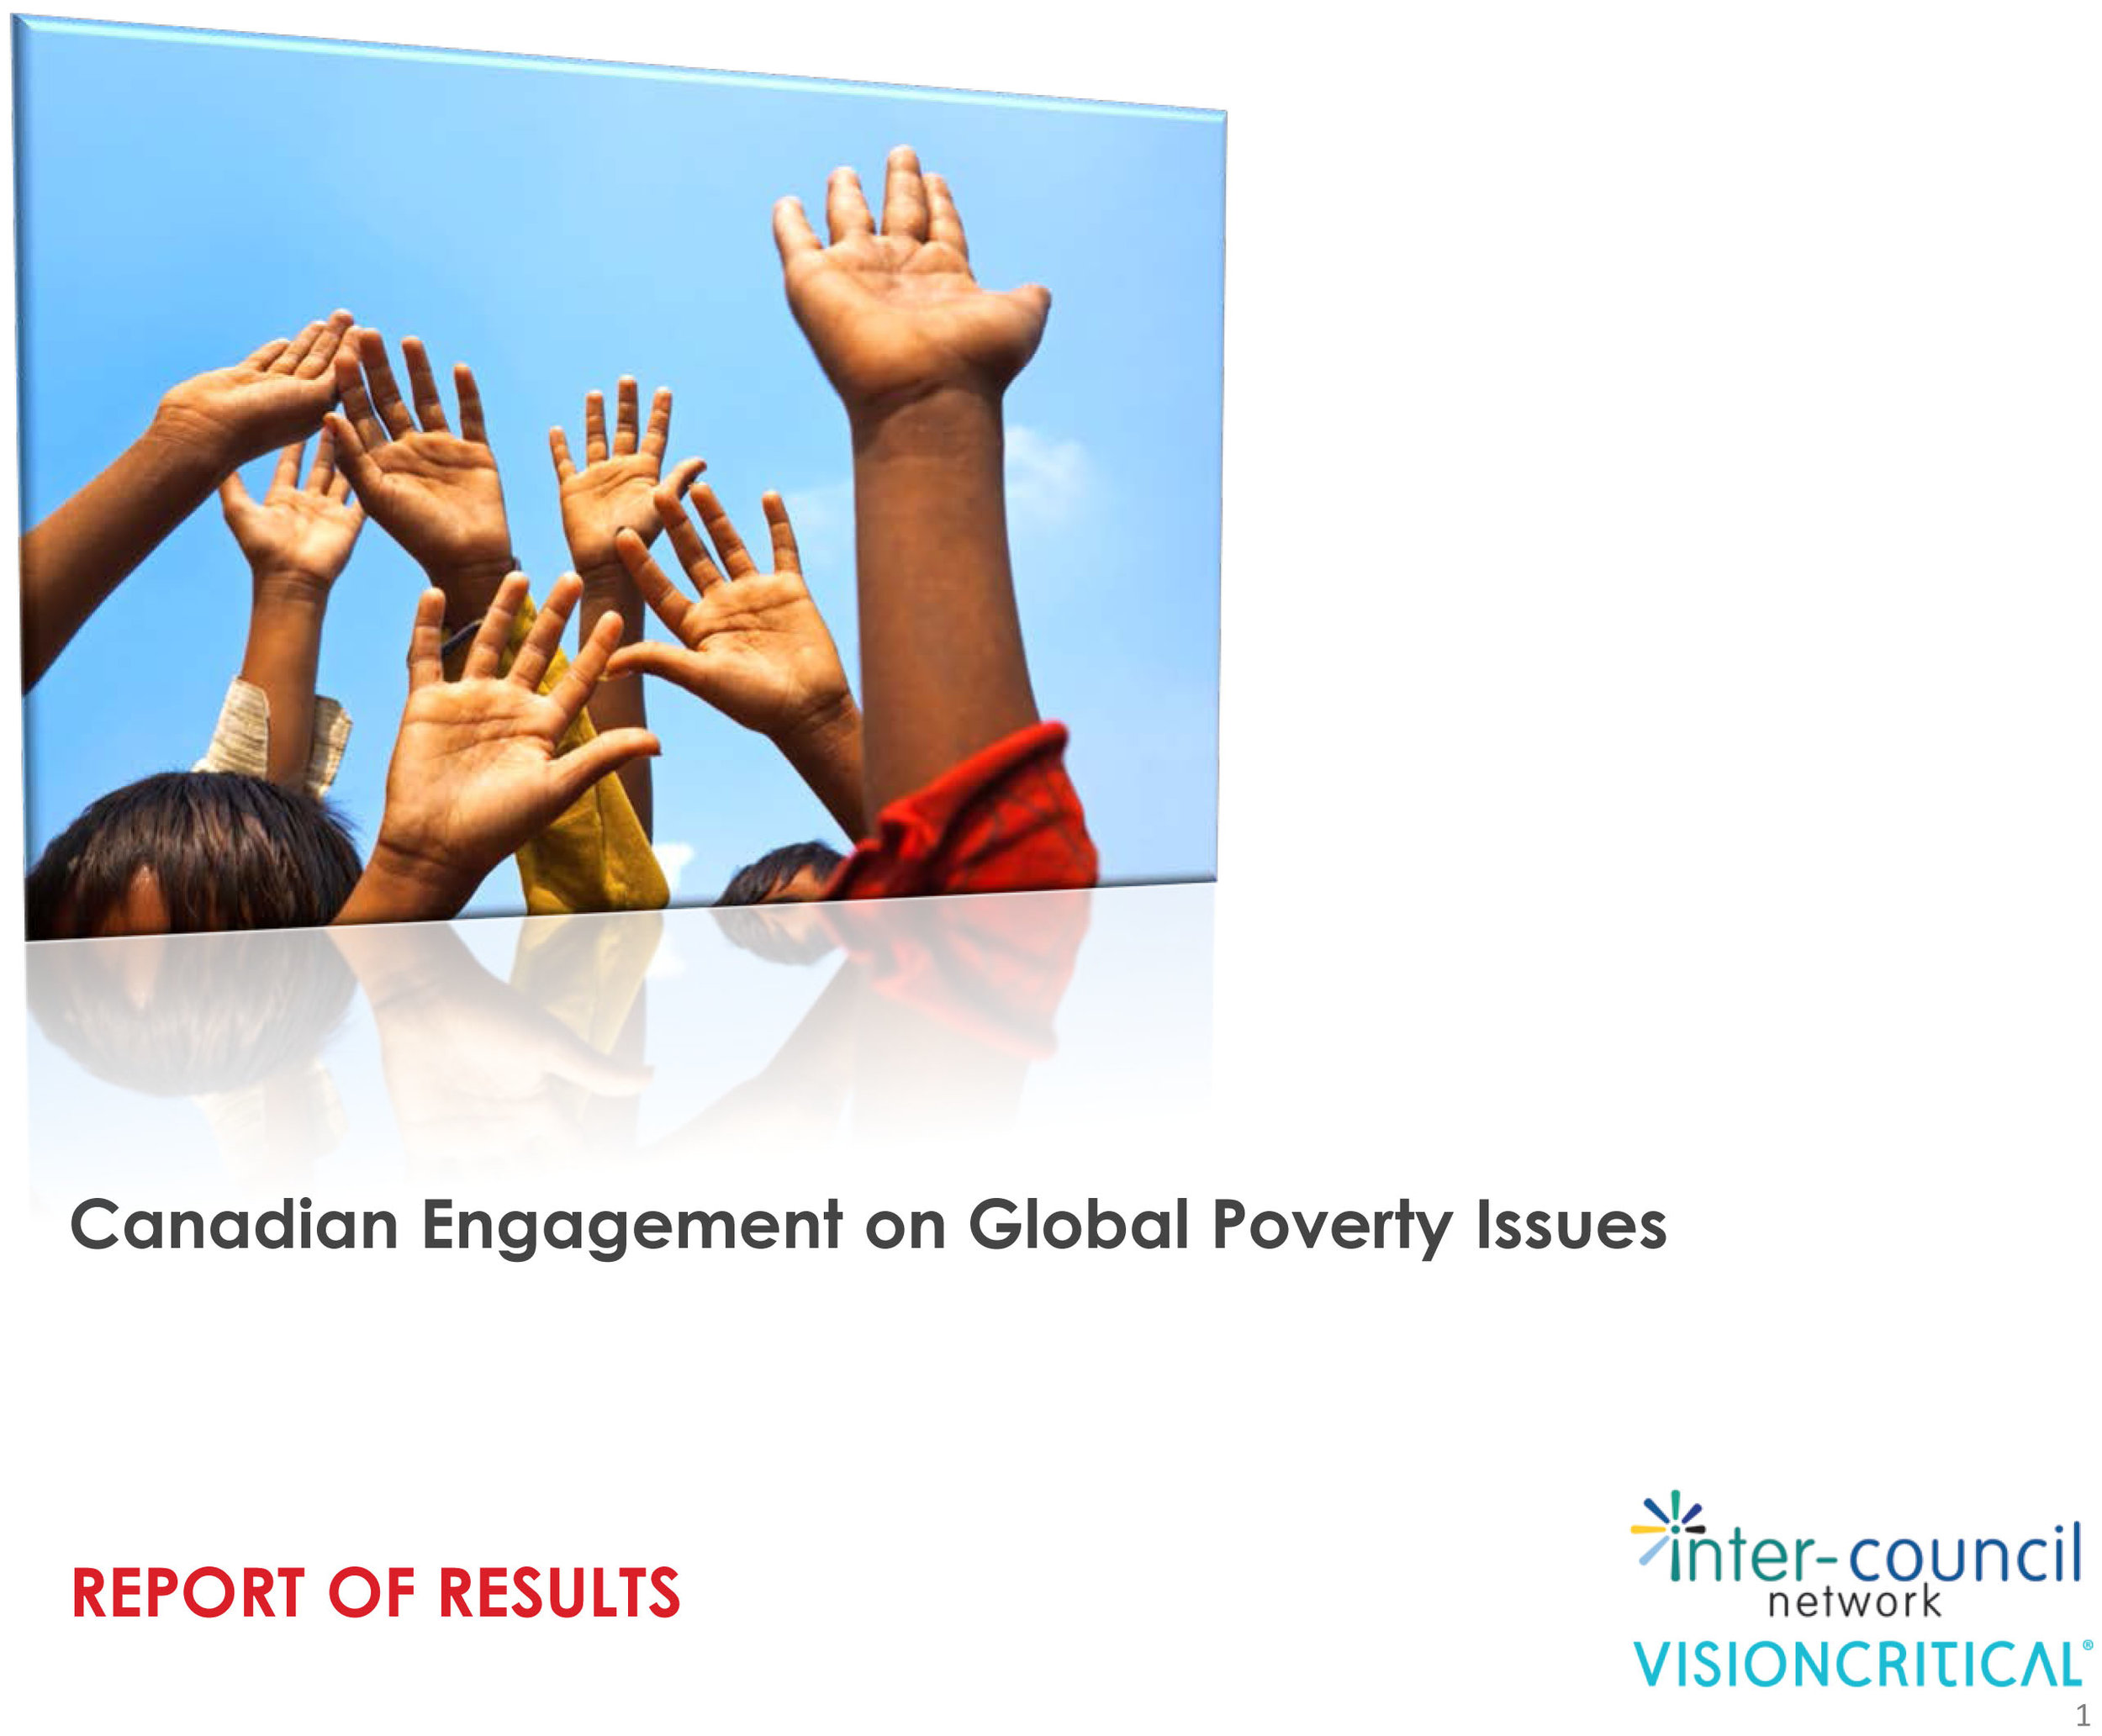 Canadian Engagement on Global Poverty Issues (Report of results), May 2012